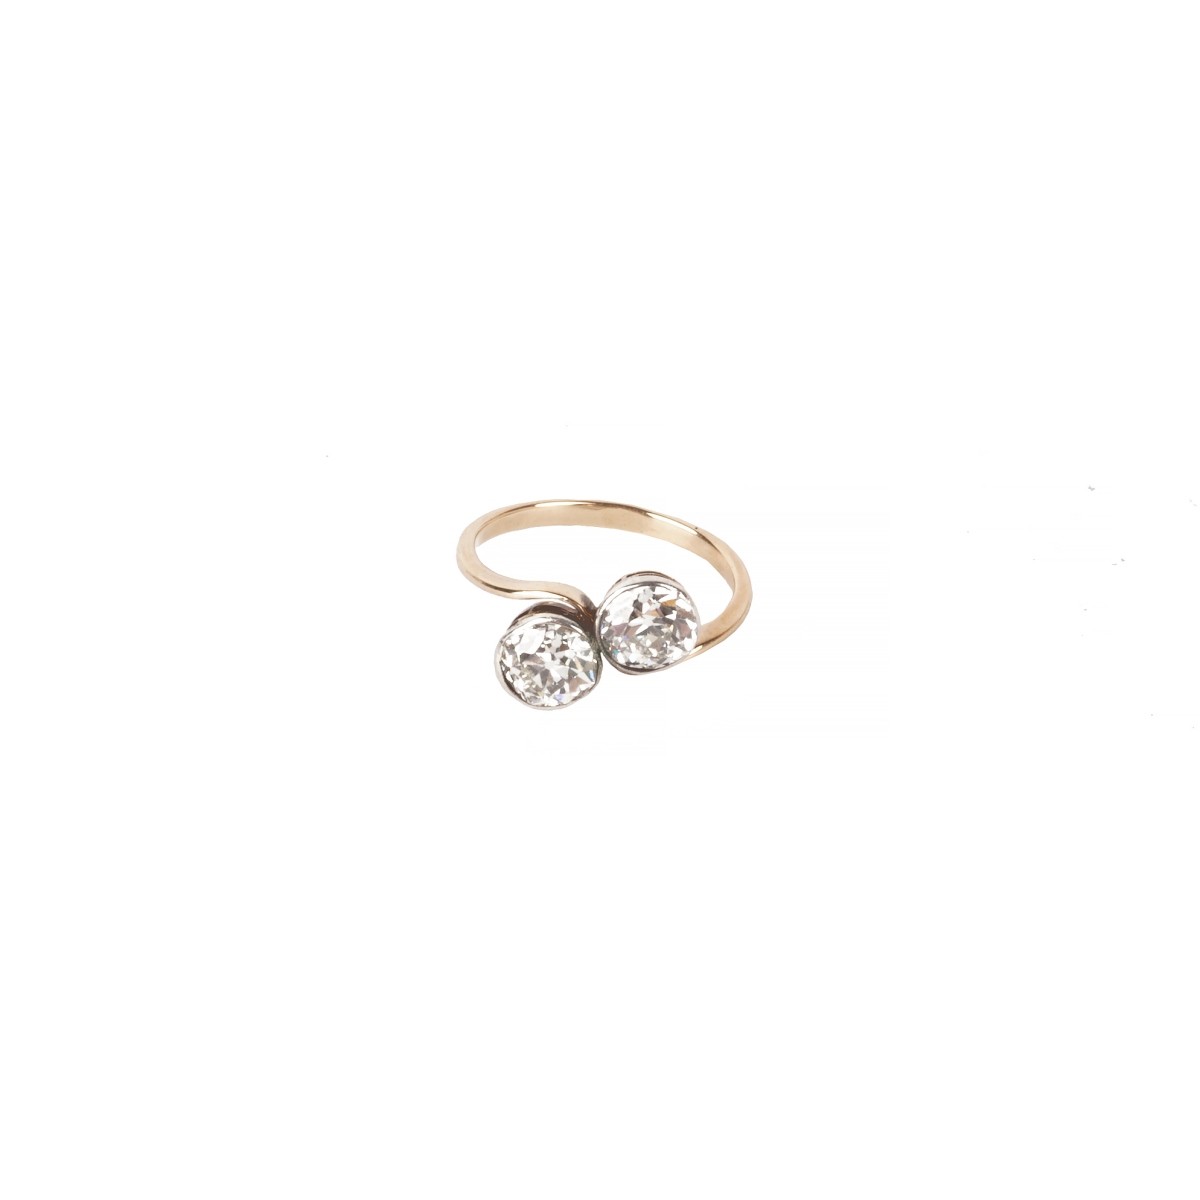 Antique Diamond Gold and Silver Ring